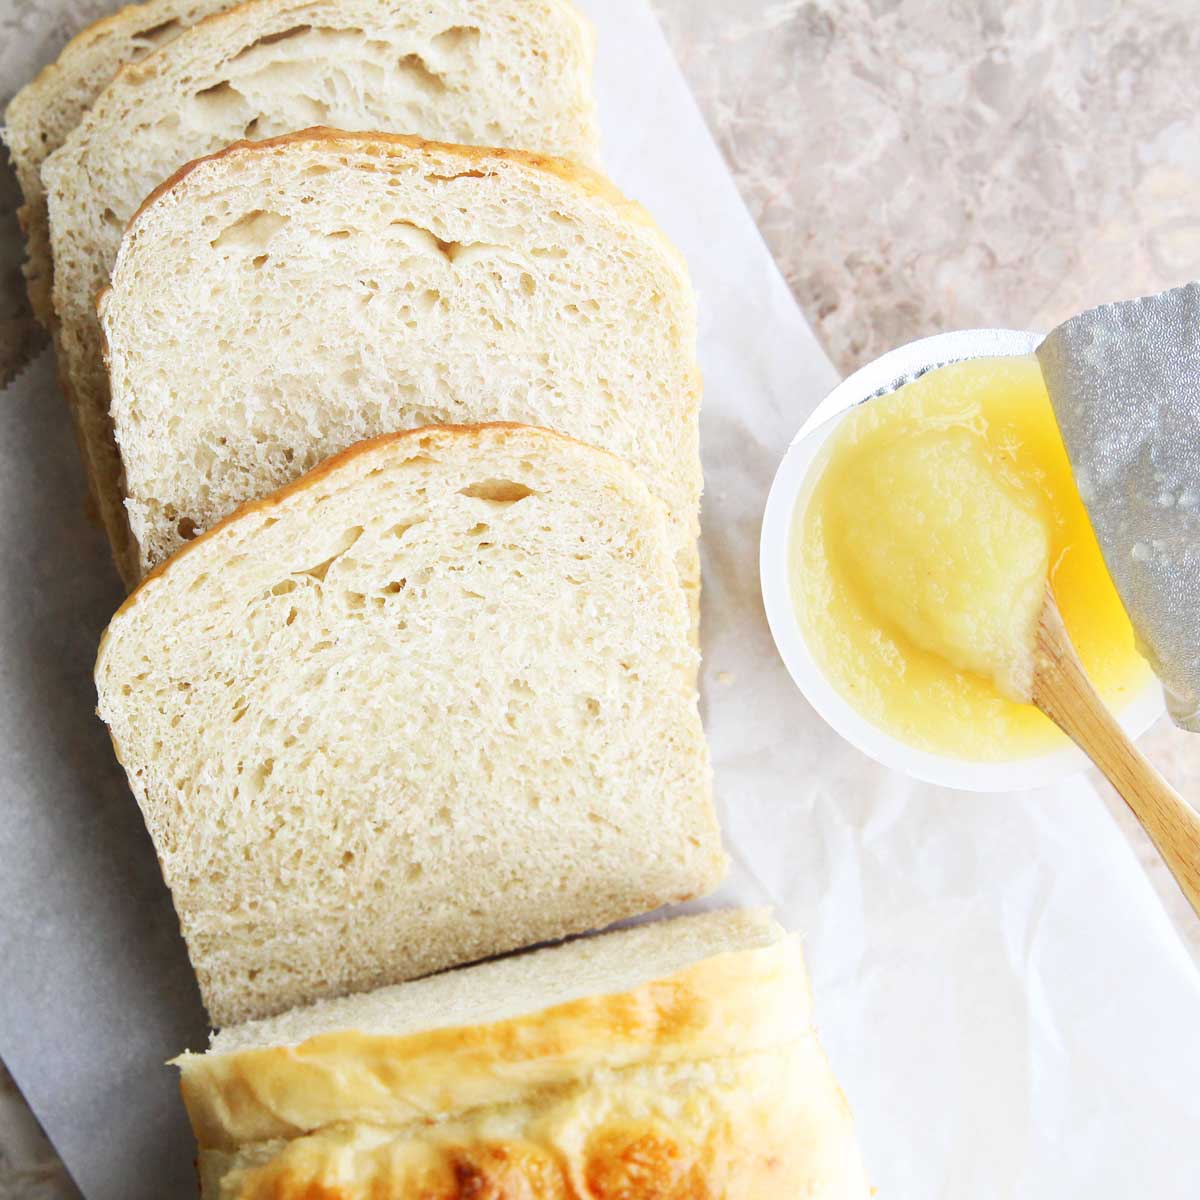 Applesauce Yeast Bread (A Healthier Recipe for White Bread) - yeast bread